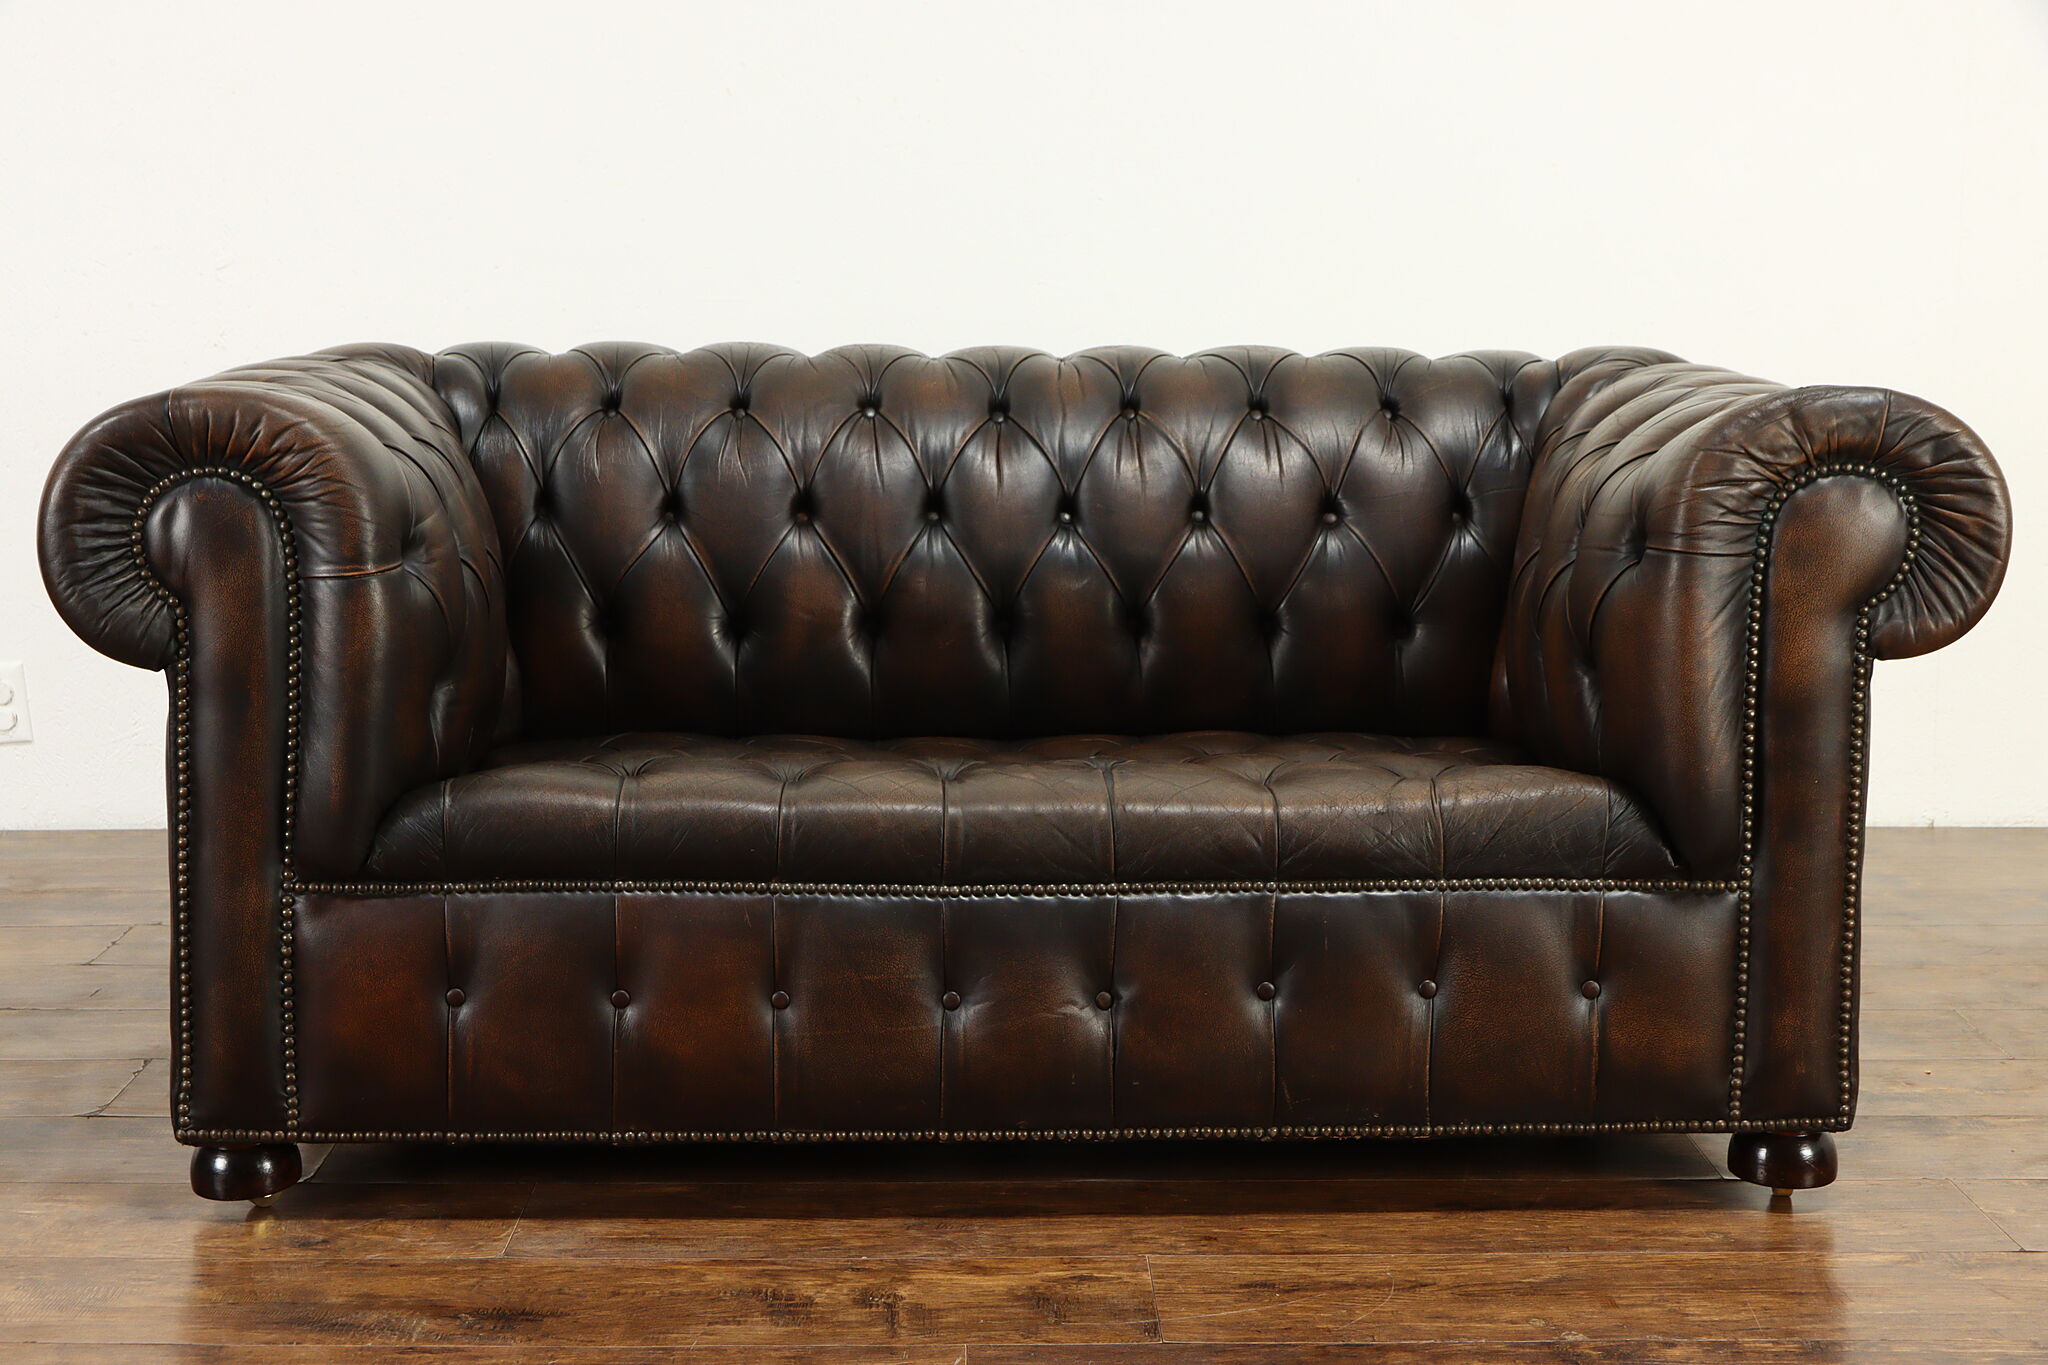 Tufted Leather Vintage Chesterfield, Chesterfield Loveseat Brown Leather